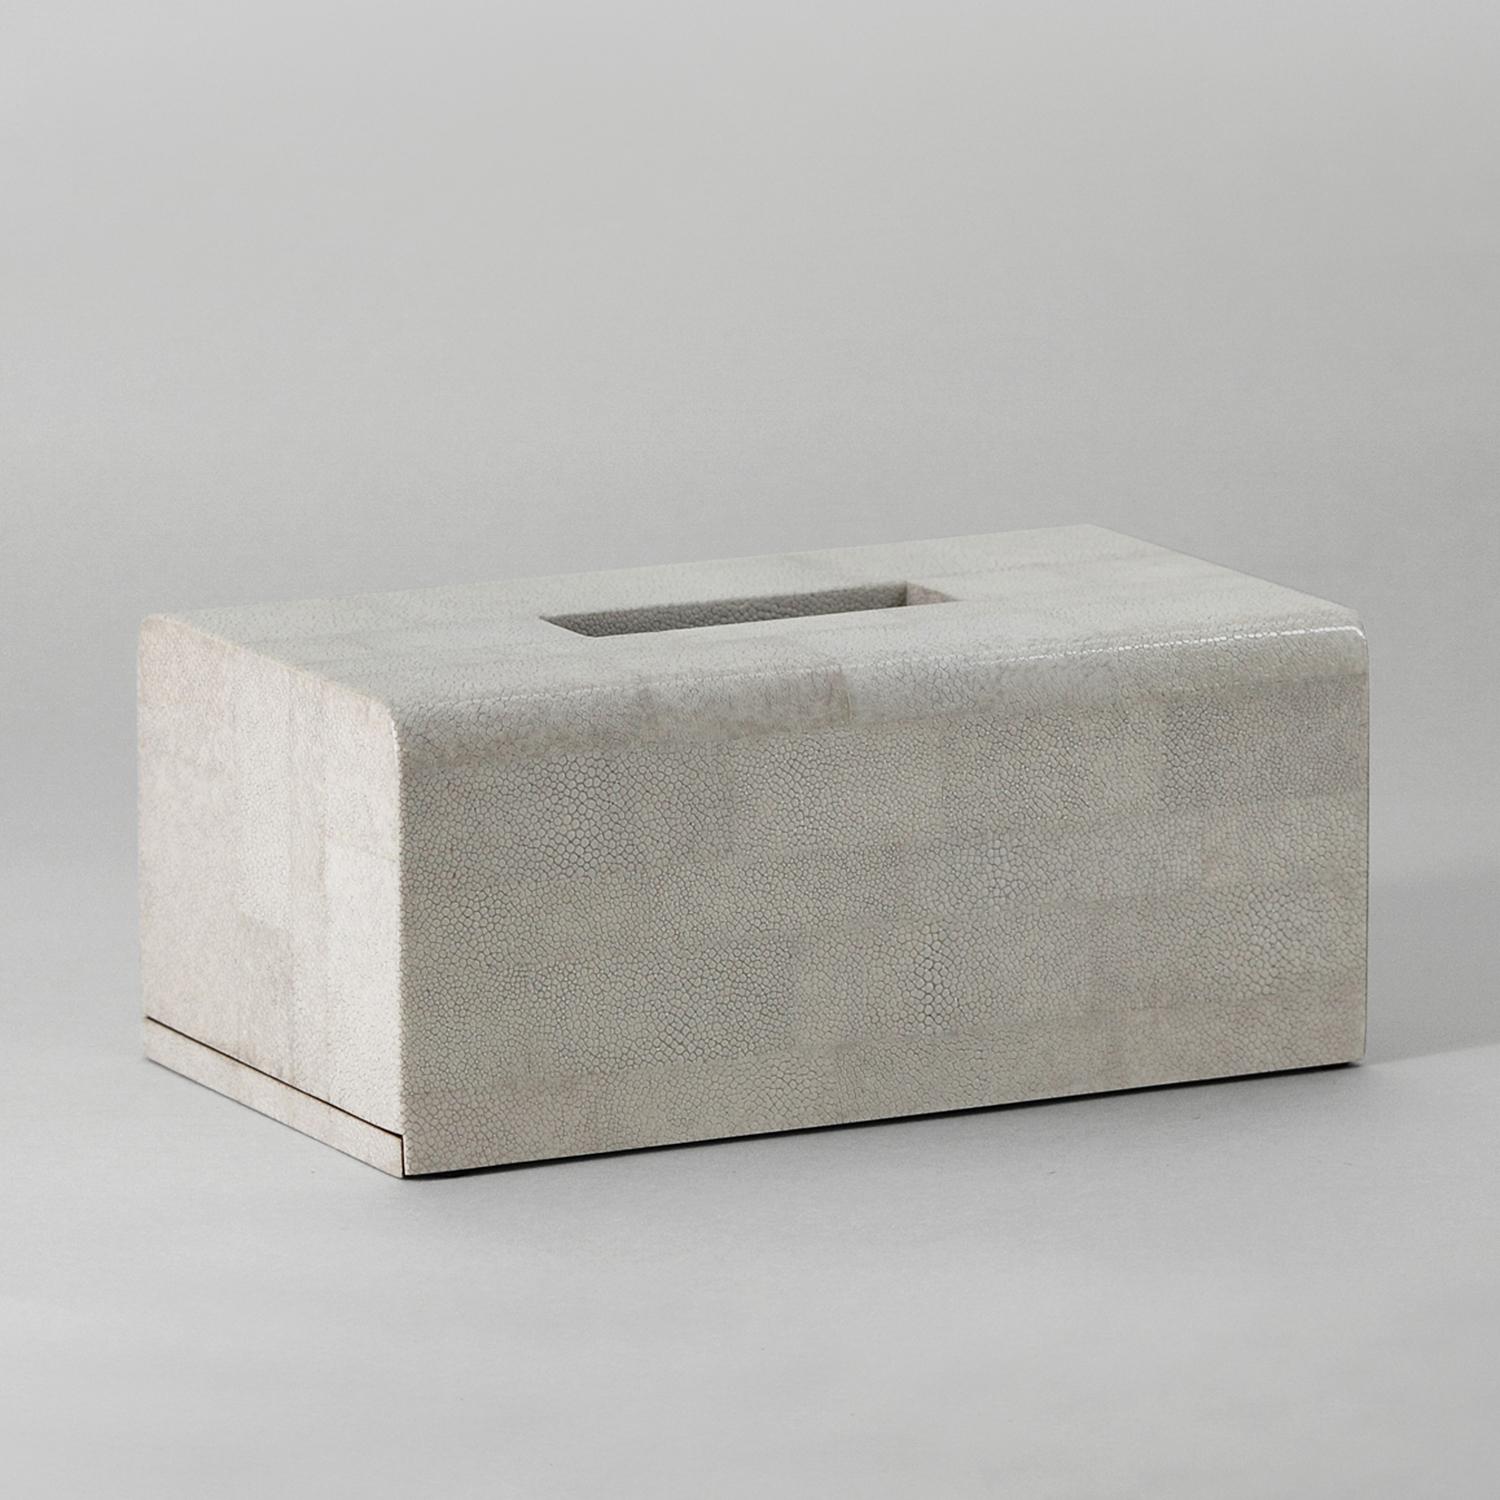 Lines of shagreen cover elegant tissue box, allowing subtle differences in the natural tone and texture of each panel.